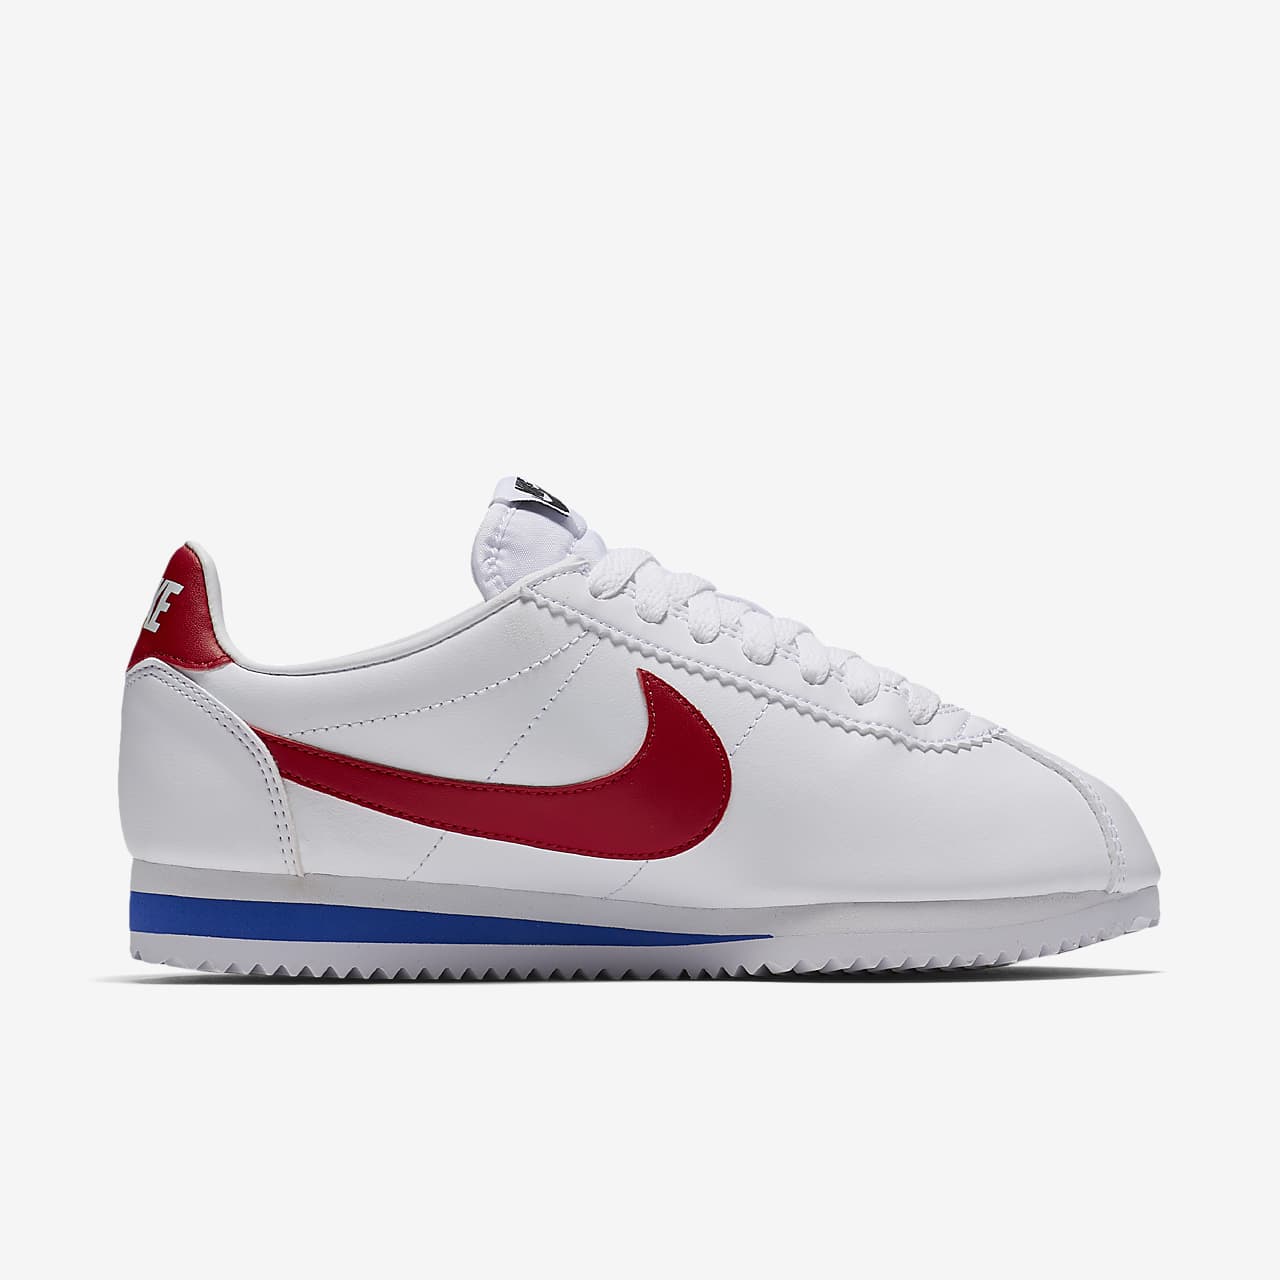 nike cortez red and blue